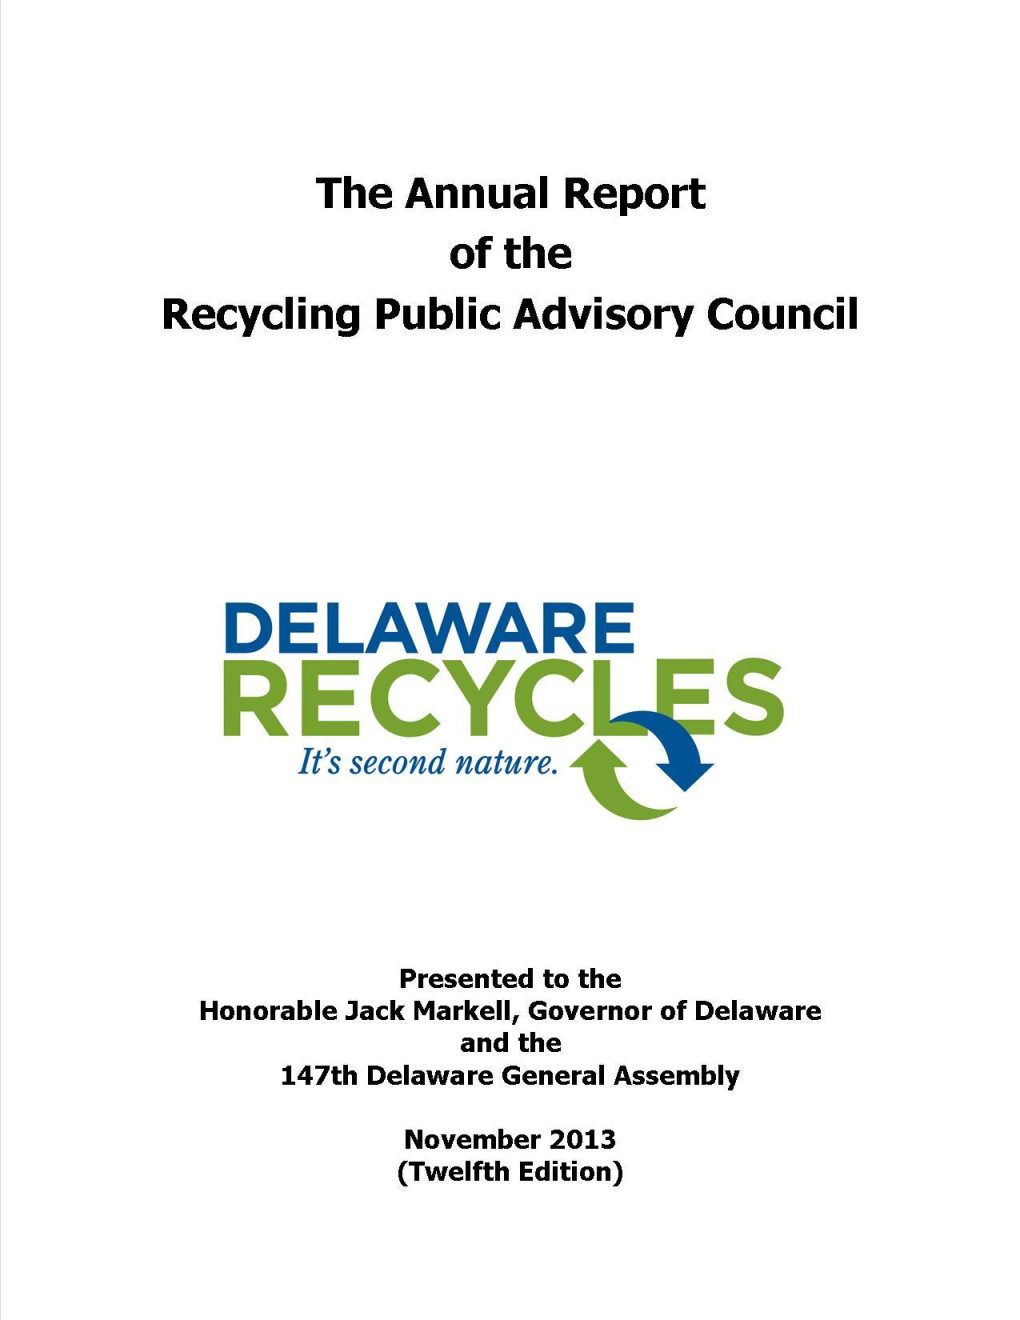 The Sixth Annual Report